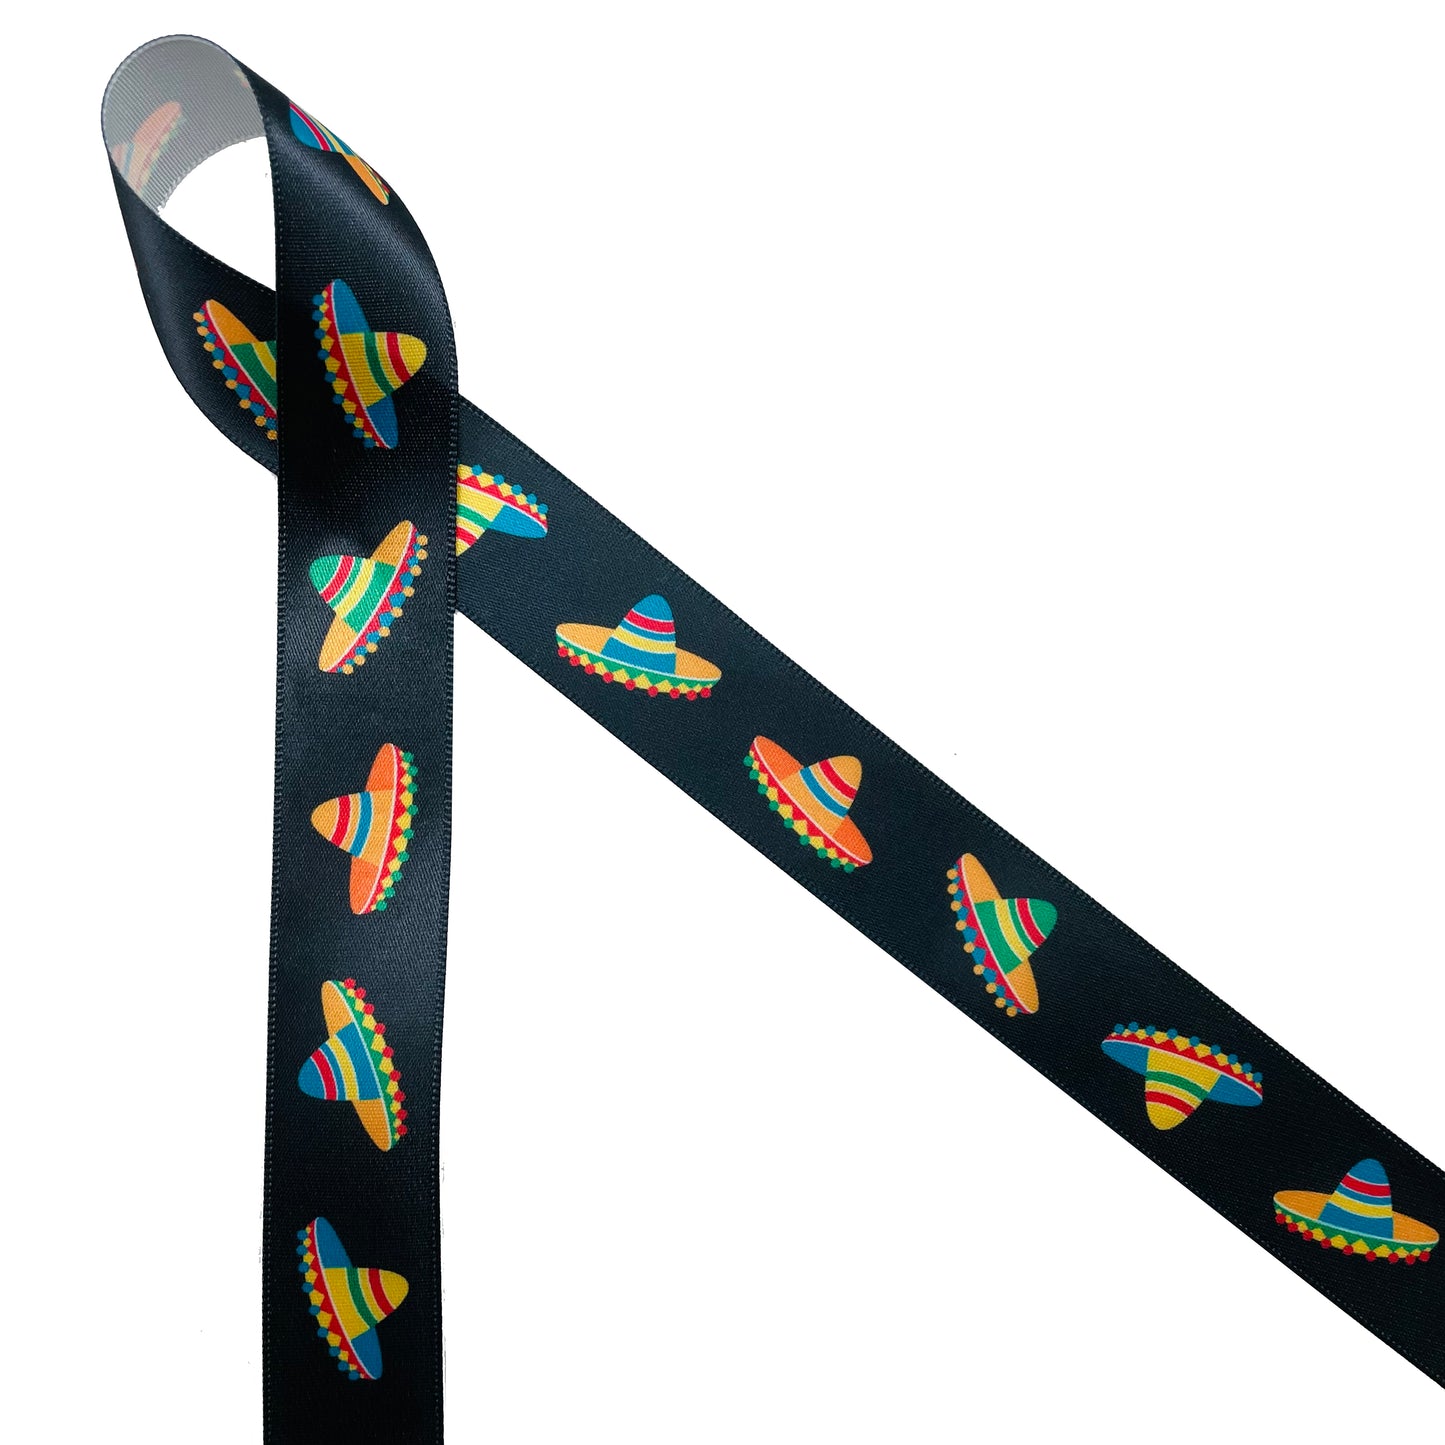 Sombrero ribbon colorful Sombreos on a black background printed on 5/8" and 7/8" white satin